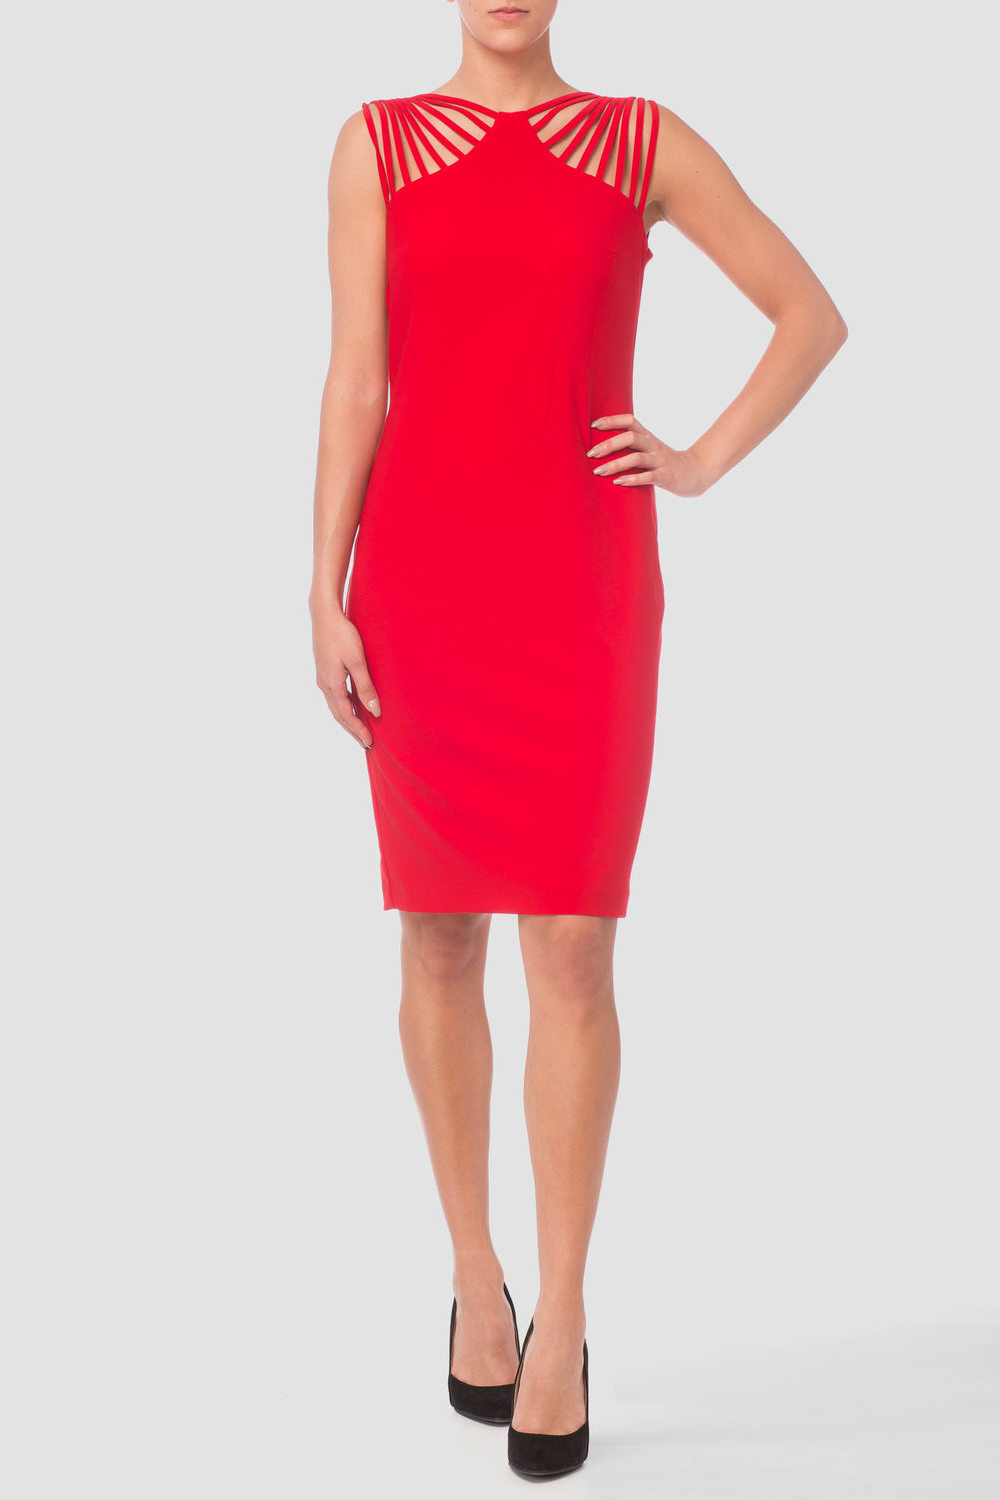 Joseph Ribkoff robe style 173028. Rouge A Levres 173